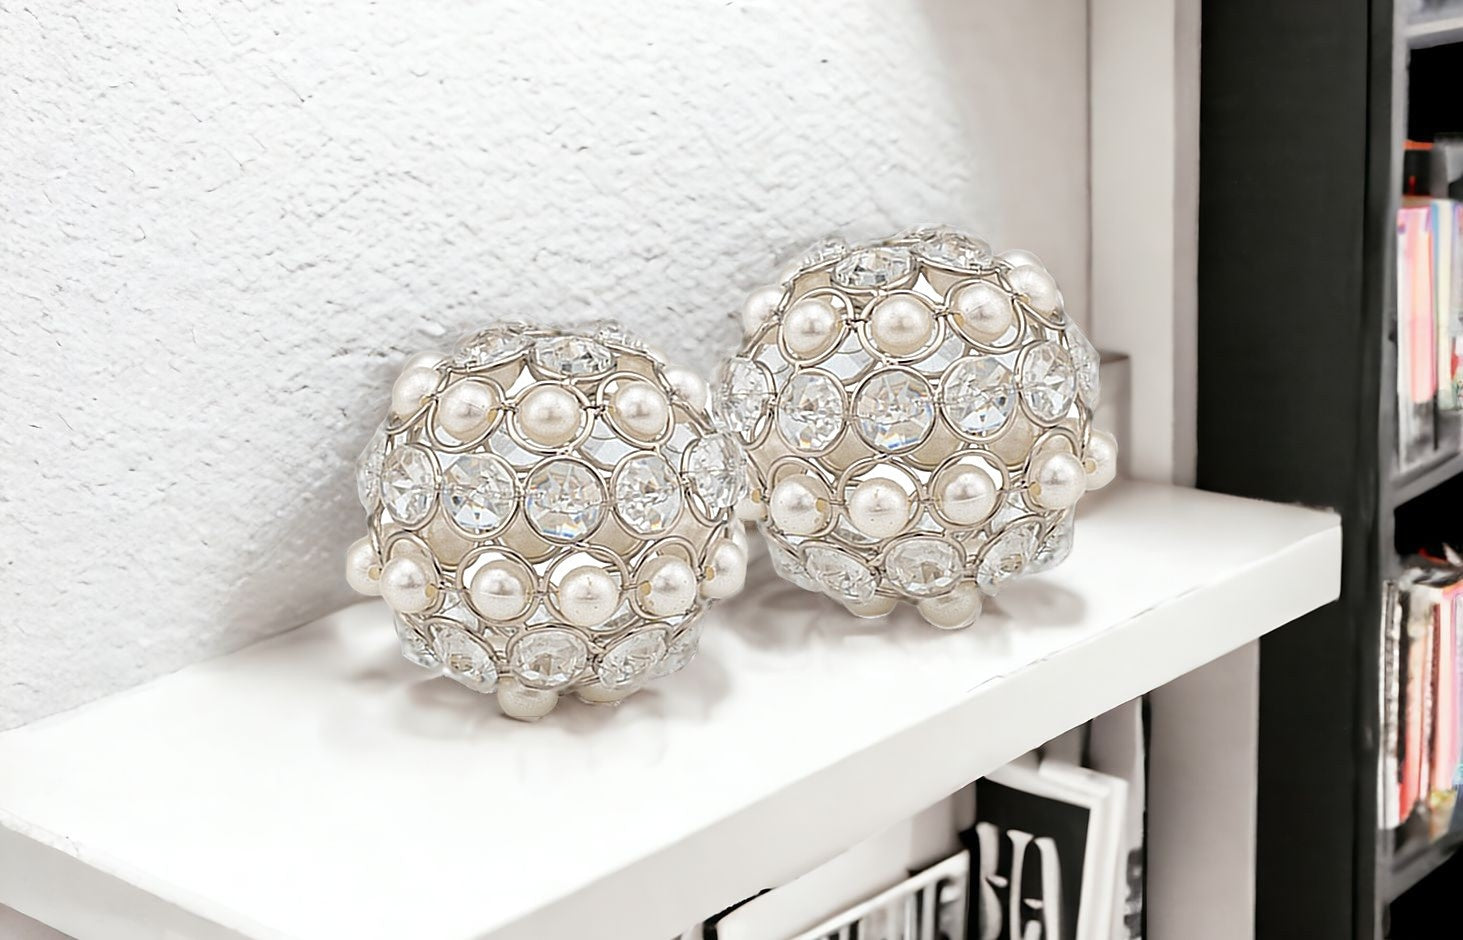 Set of Two Silver and Clear Faux Crystal and Pearl Decorative Orbs